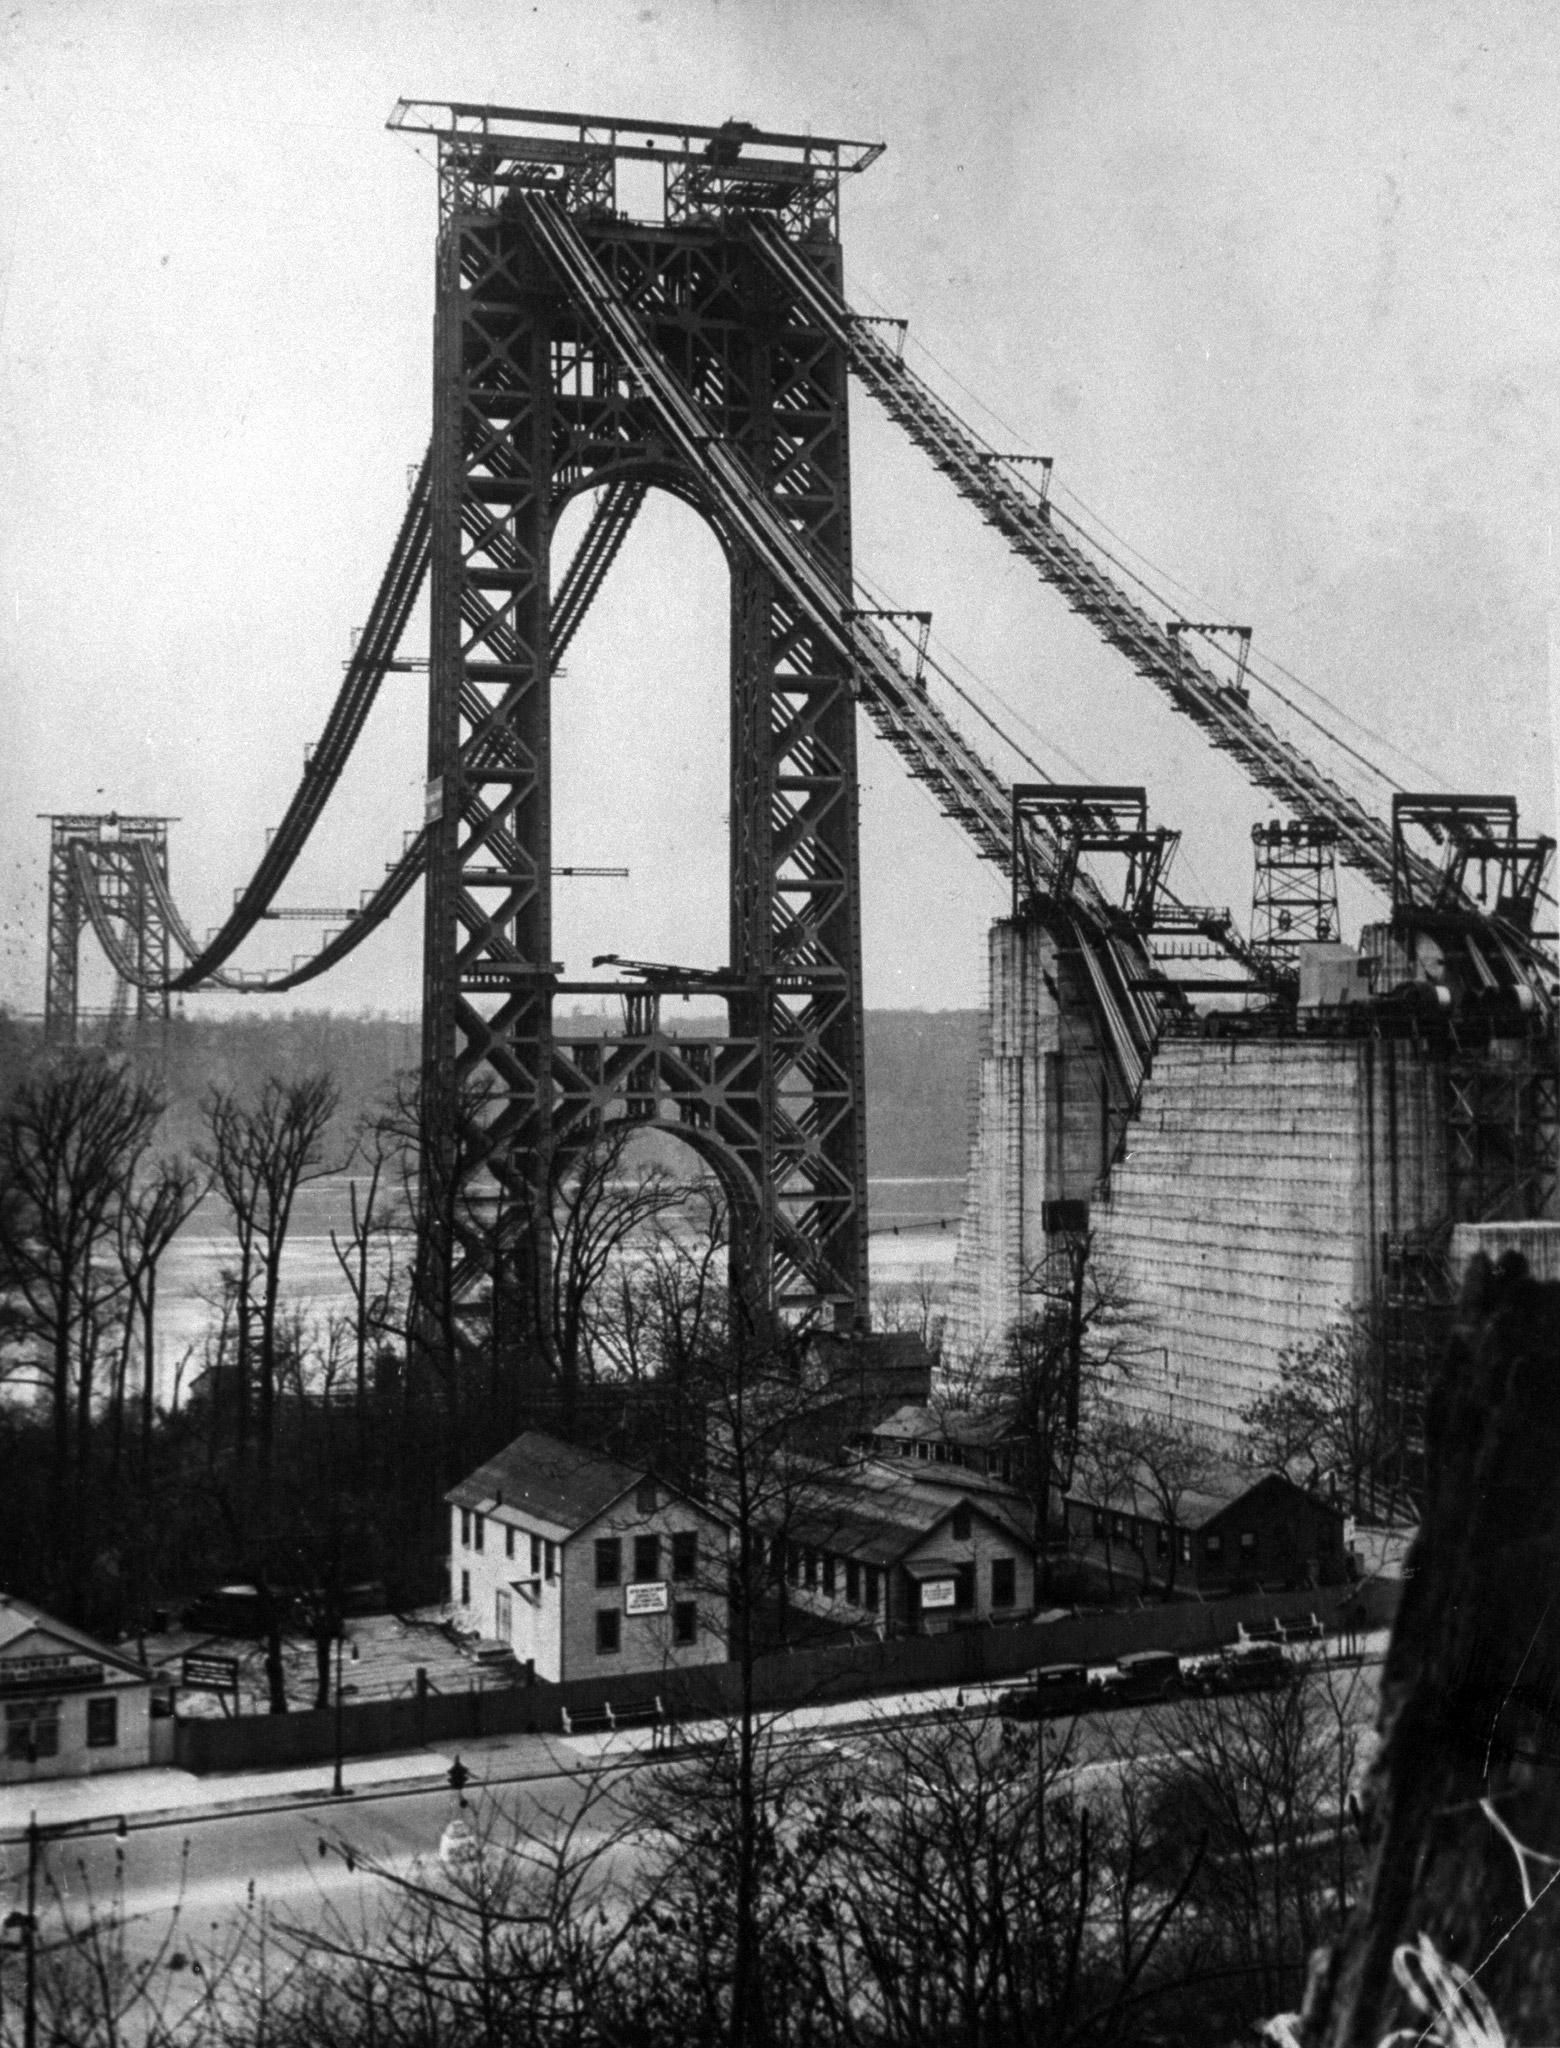 Main towers and cables of the George Washington Bridge under construction that linked New York to New Jersey when it opened, the longest suspension bridge in the world. 1927.